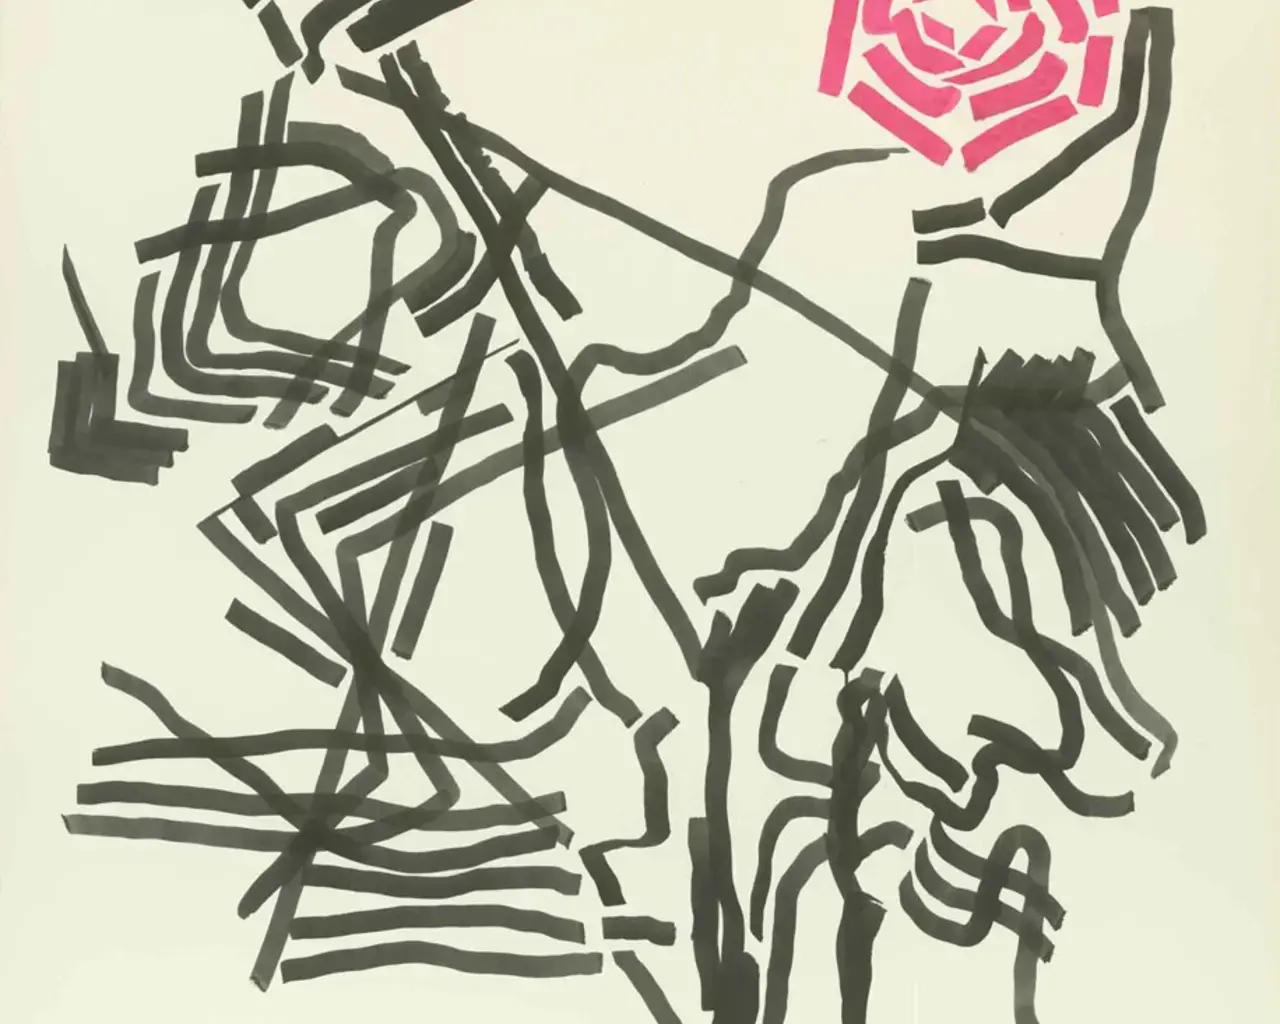 Jim Hinz, Rose Bush, 2004, ink on archival paper, 44x32. Photo courtesy of the artist.